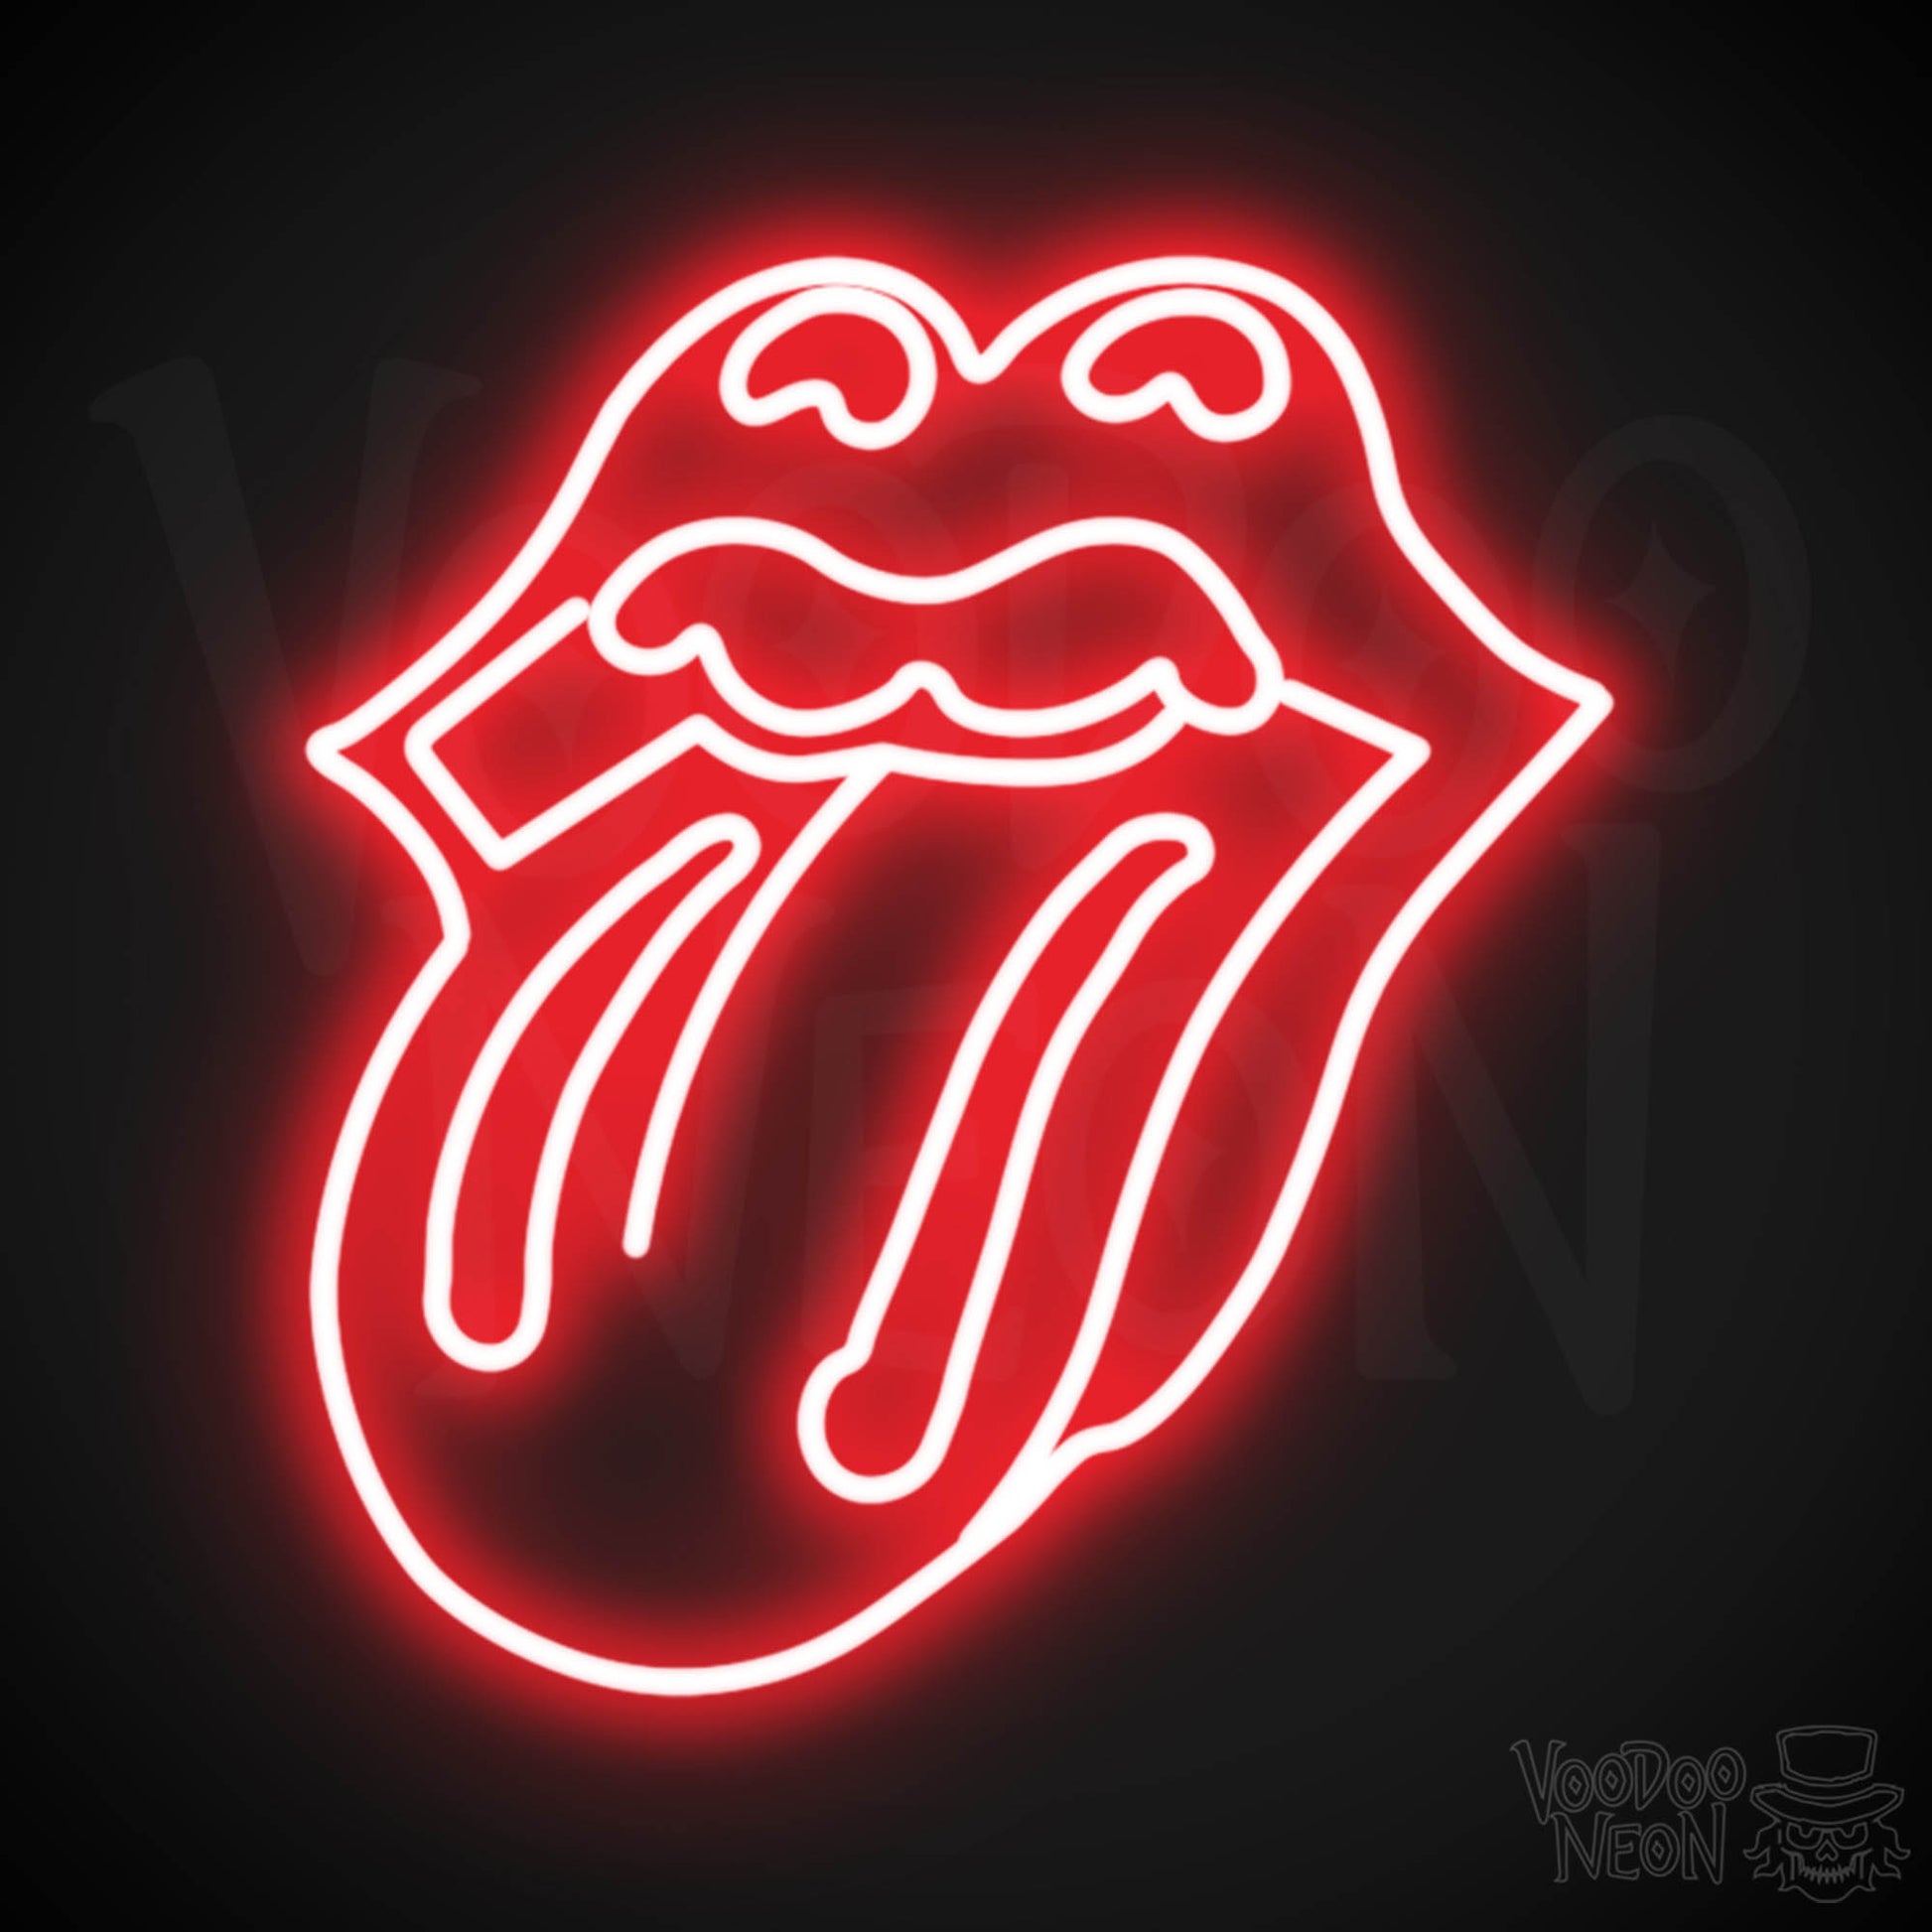 Rolling Stones Neon Sign - Rolling Stones Sign - Neon Rolling Stones Logo Wall Art - Color Red